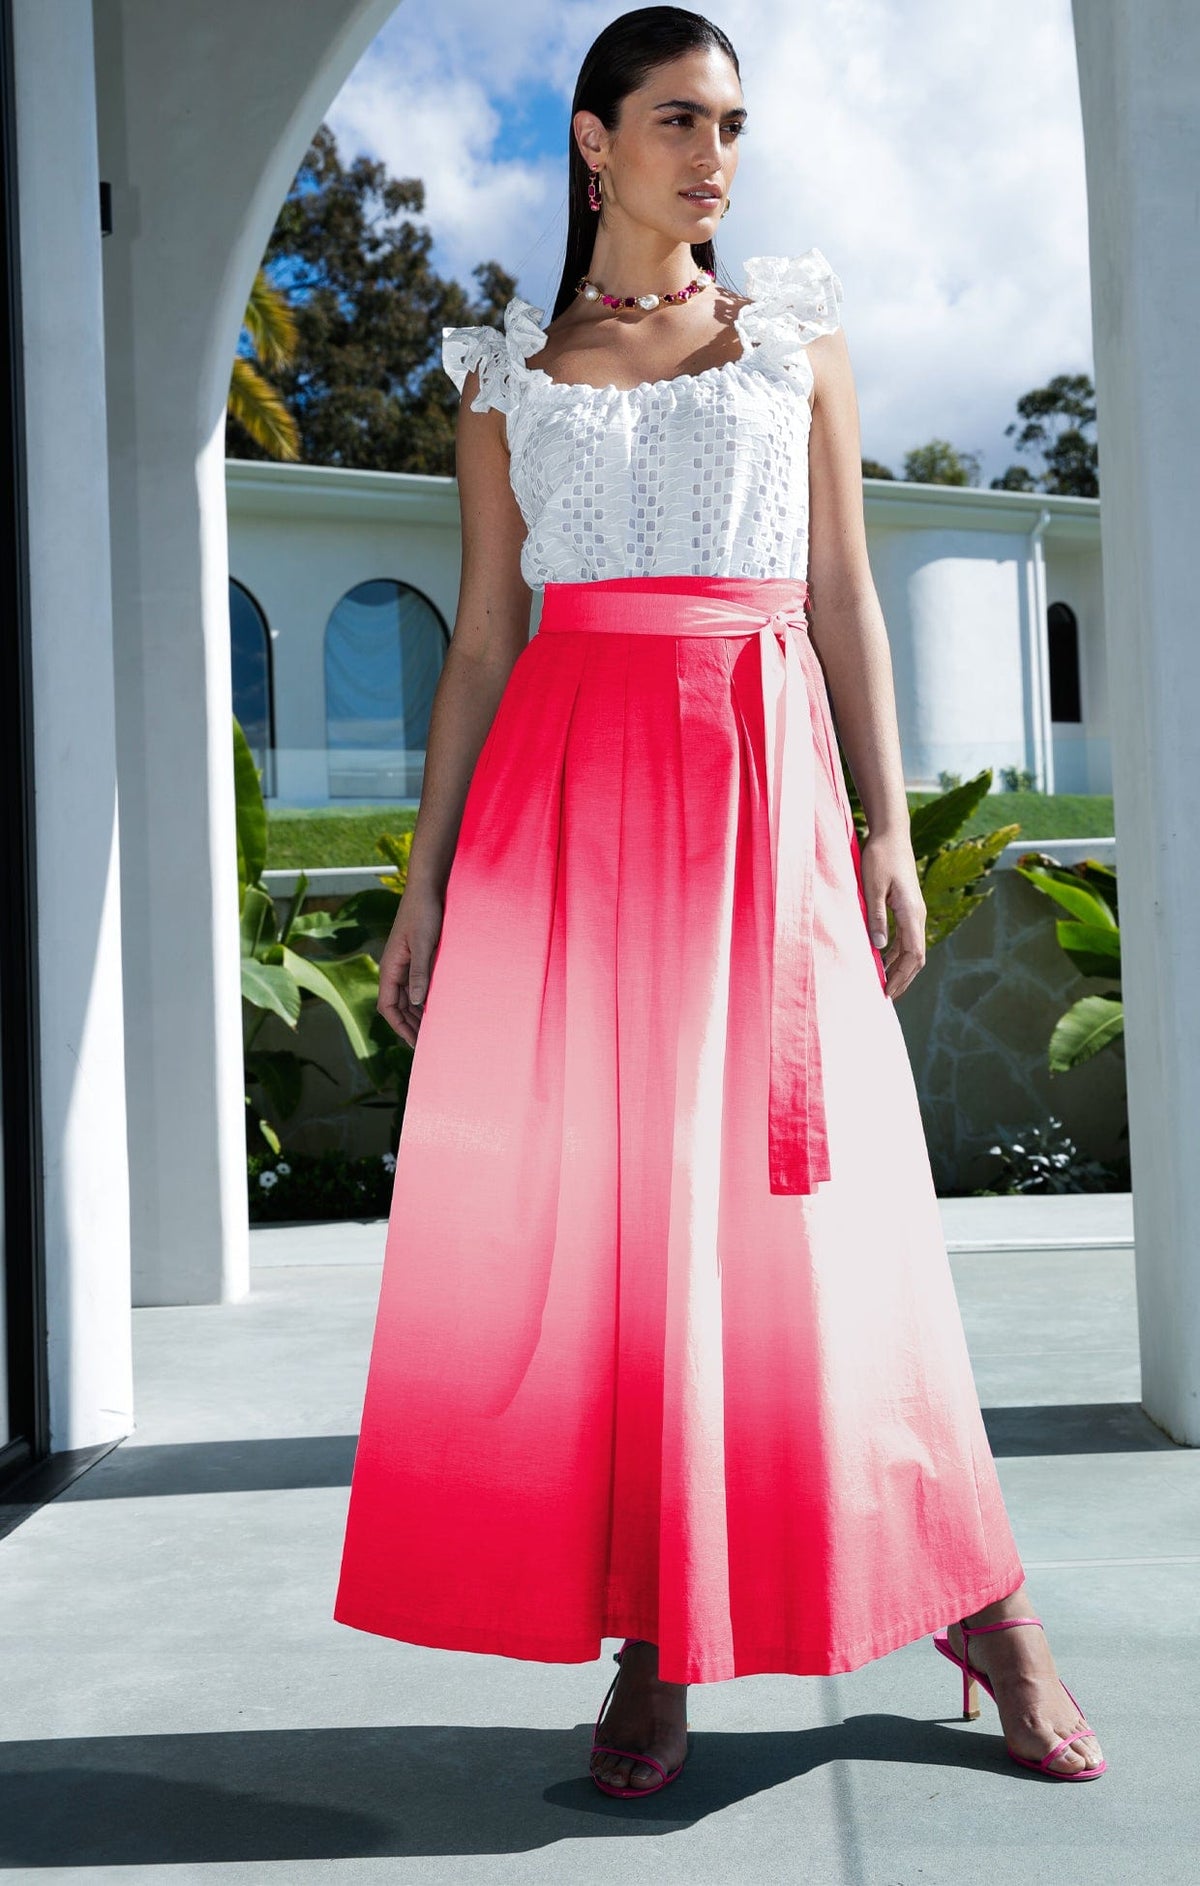 Skirts Multi Occasion CASA OJAI MAXI SKIRT IN PINK OMBRE